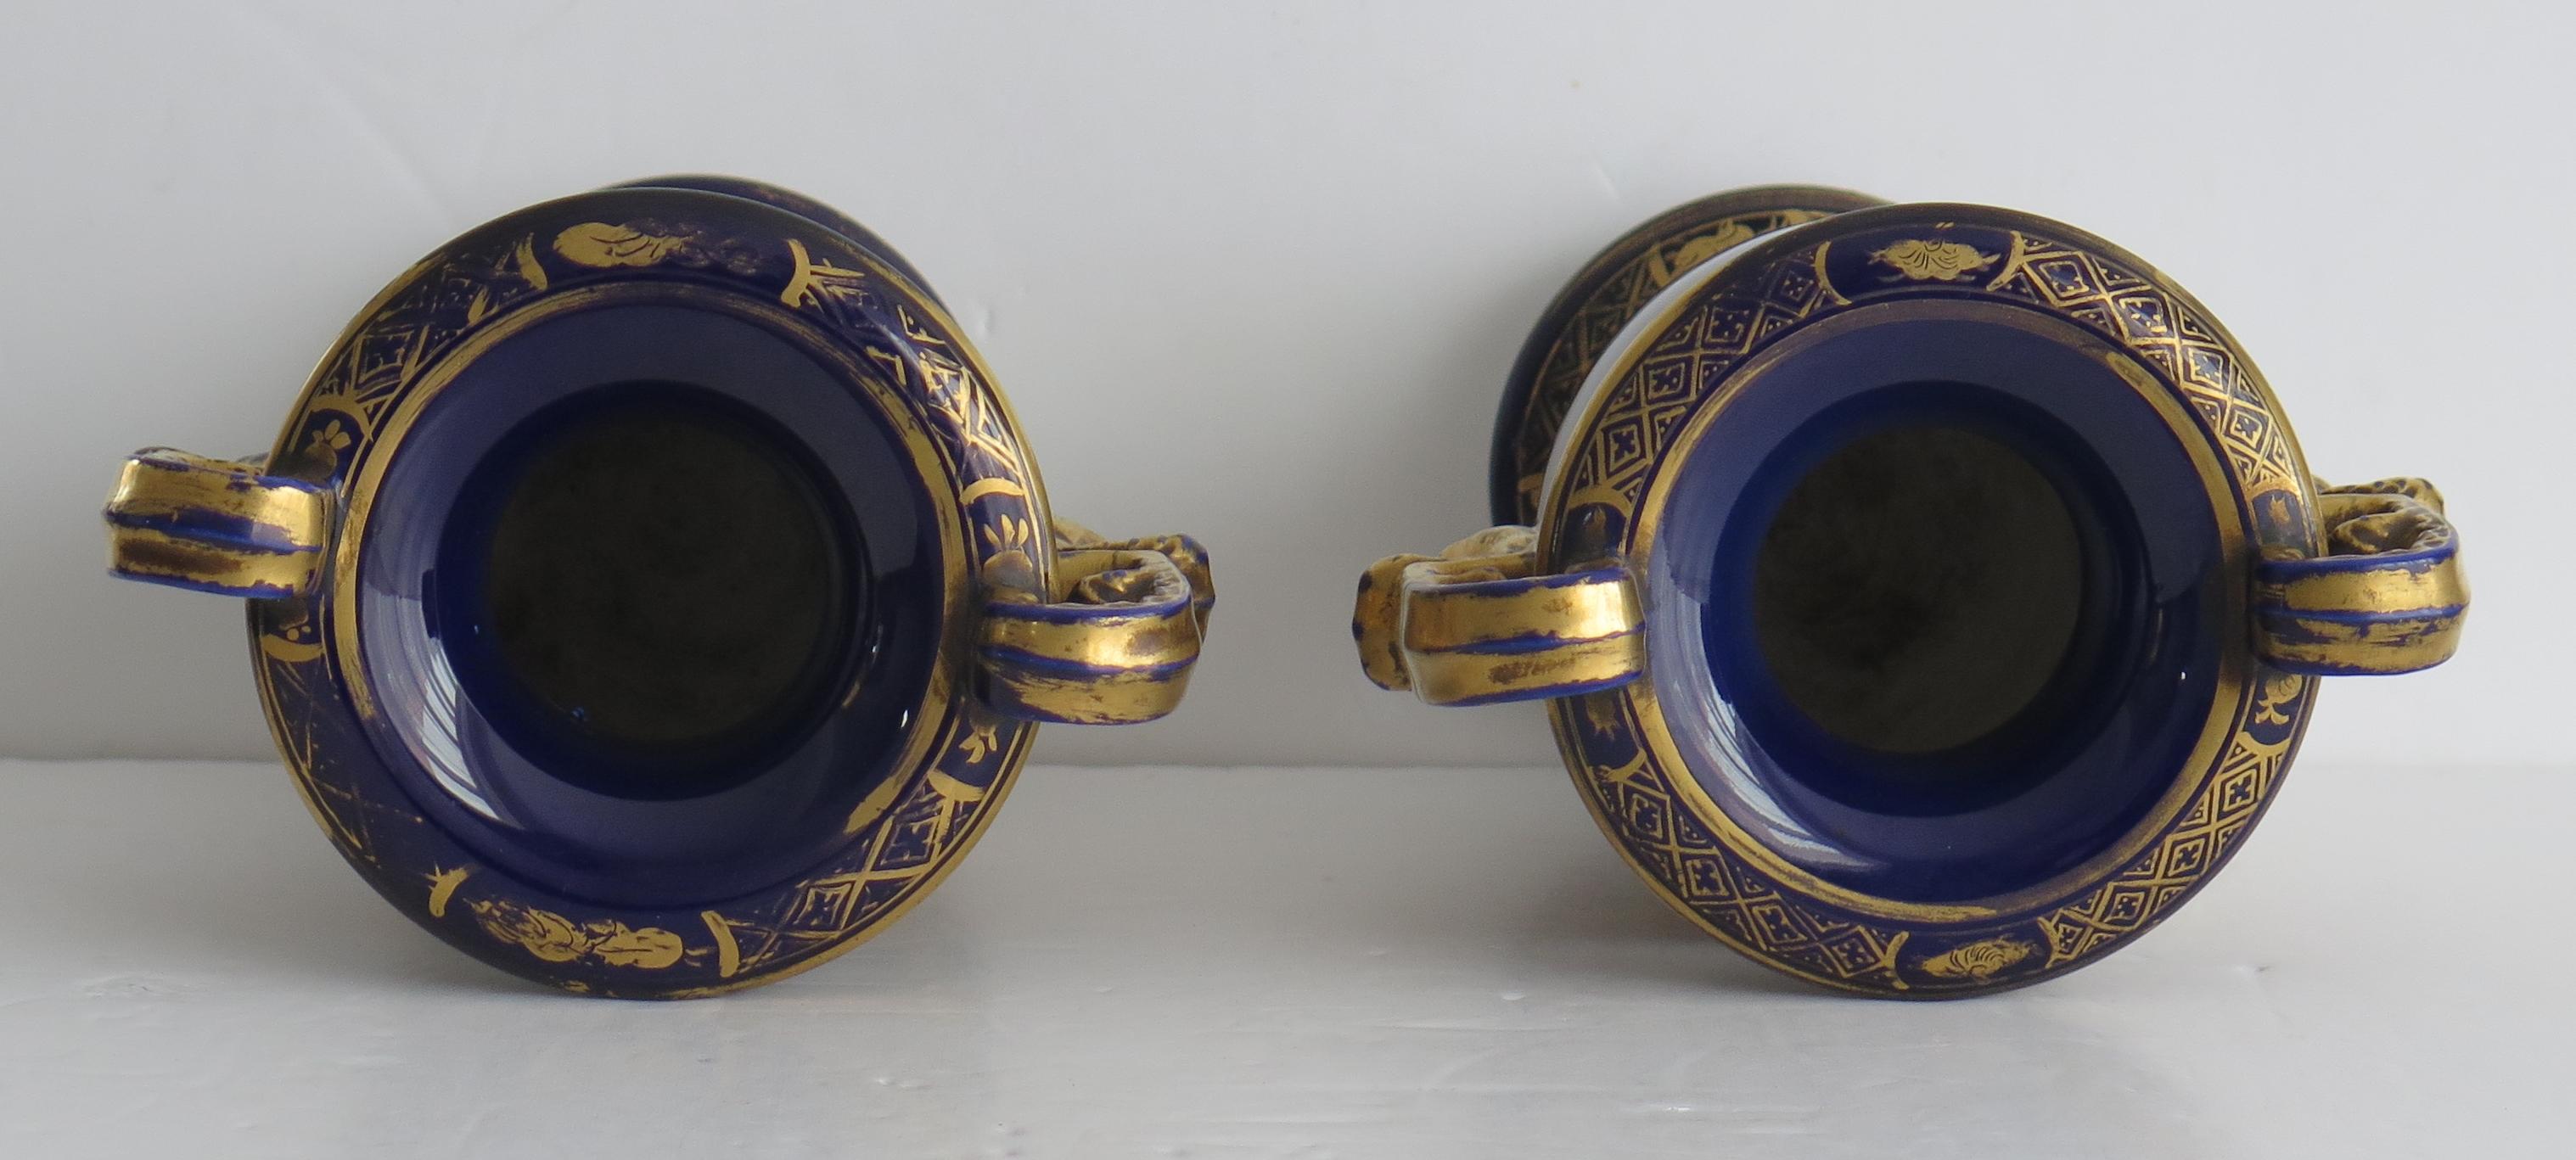 19th Century Georgian Pair of Mason's Ironstone Vases with Gold Gilded Pattern, circa 1818 For Sale